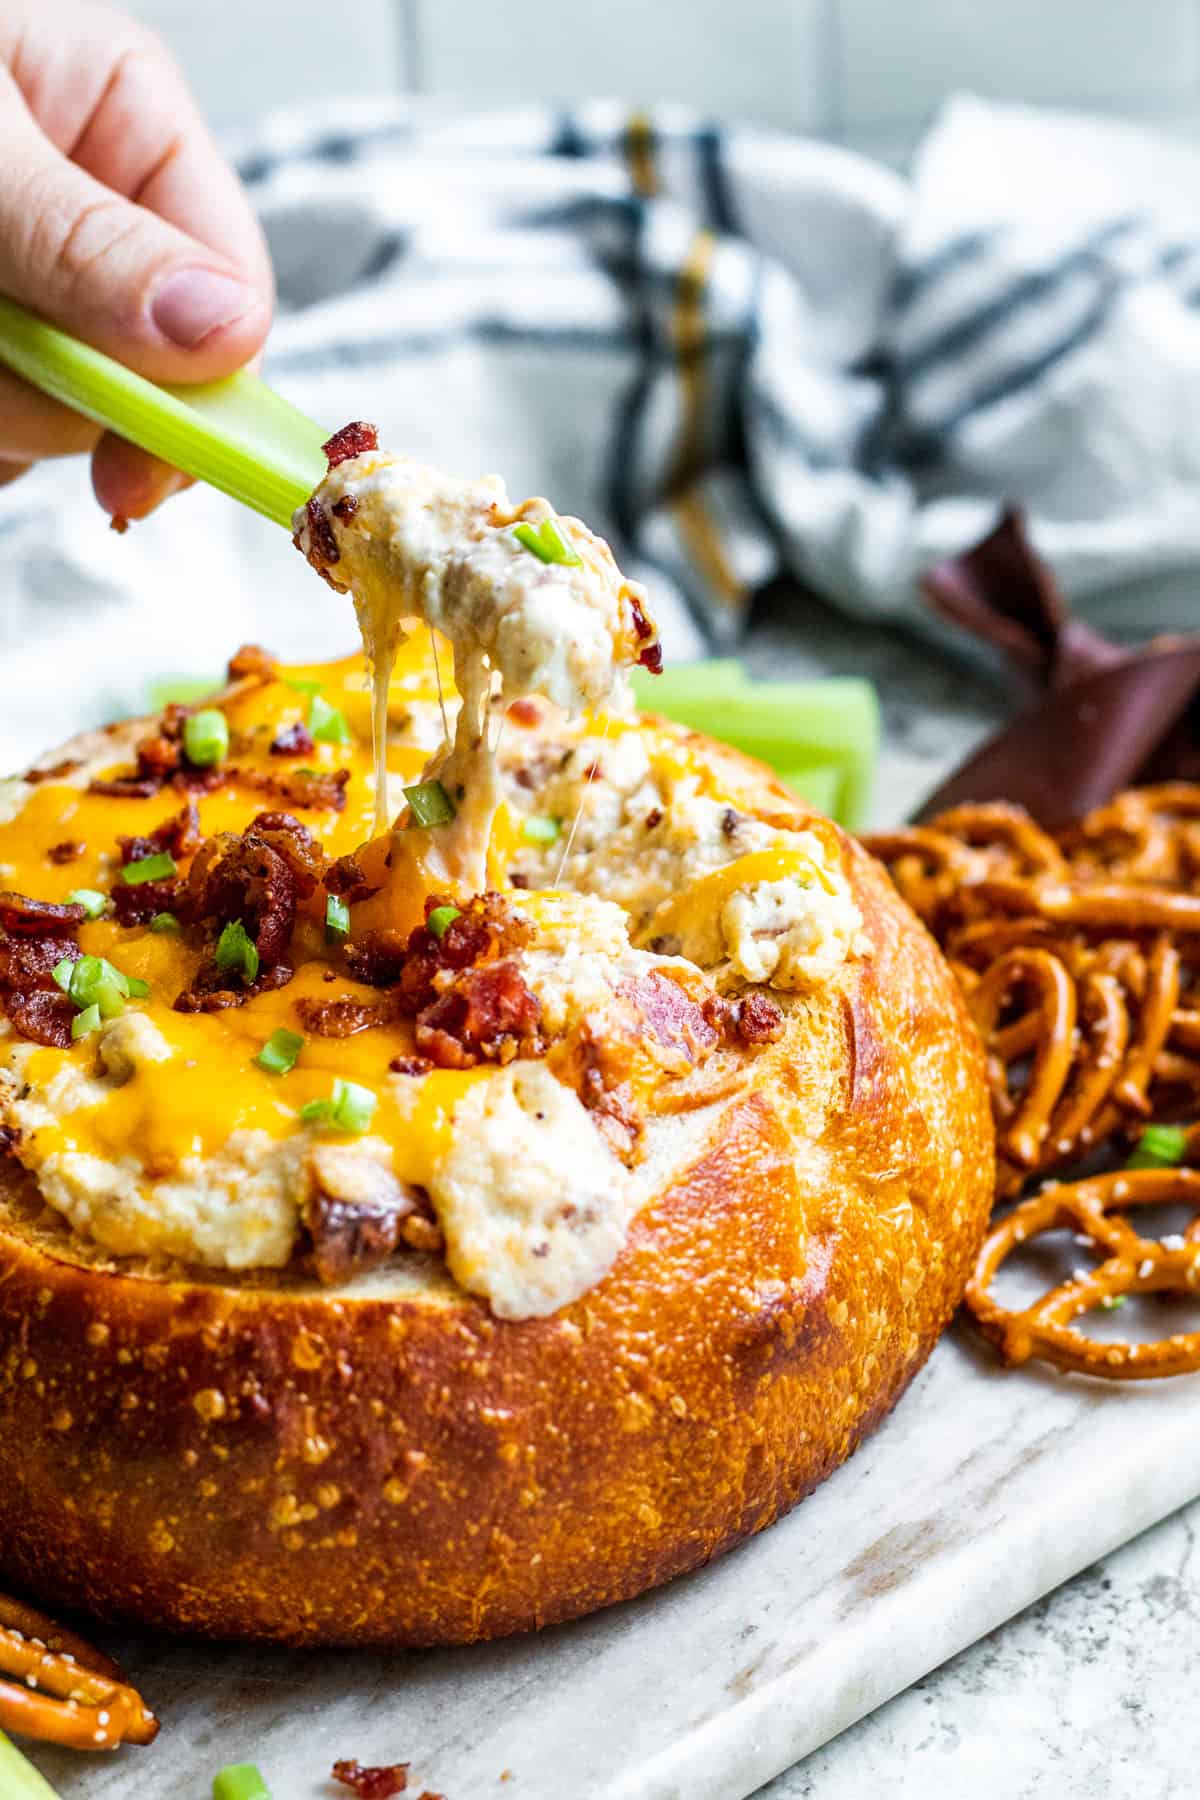 Celery being dipped into bacon dip in bread bowl.